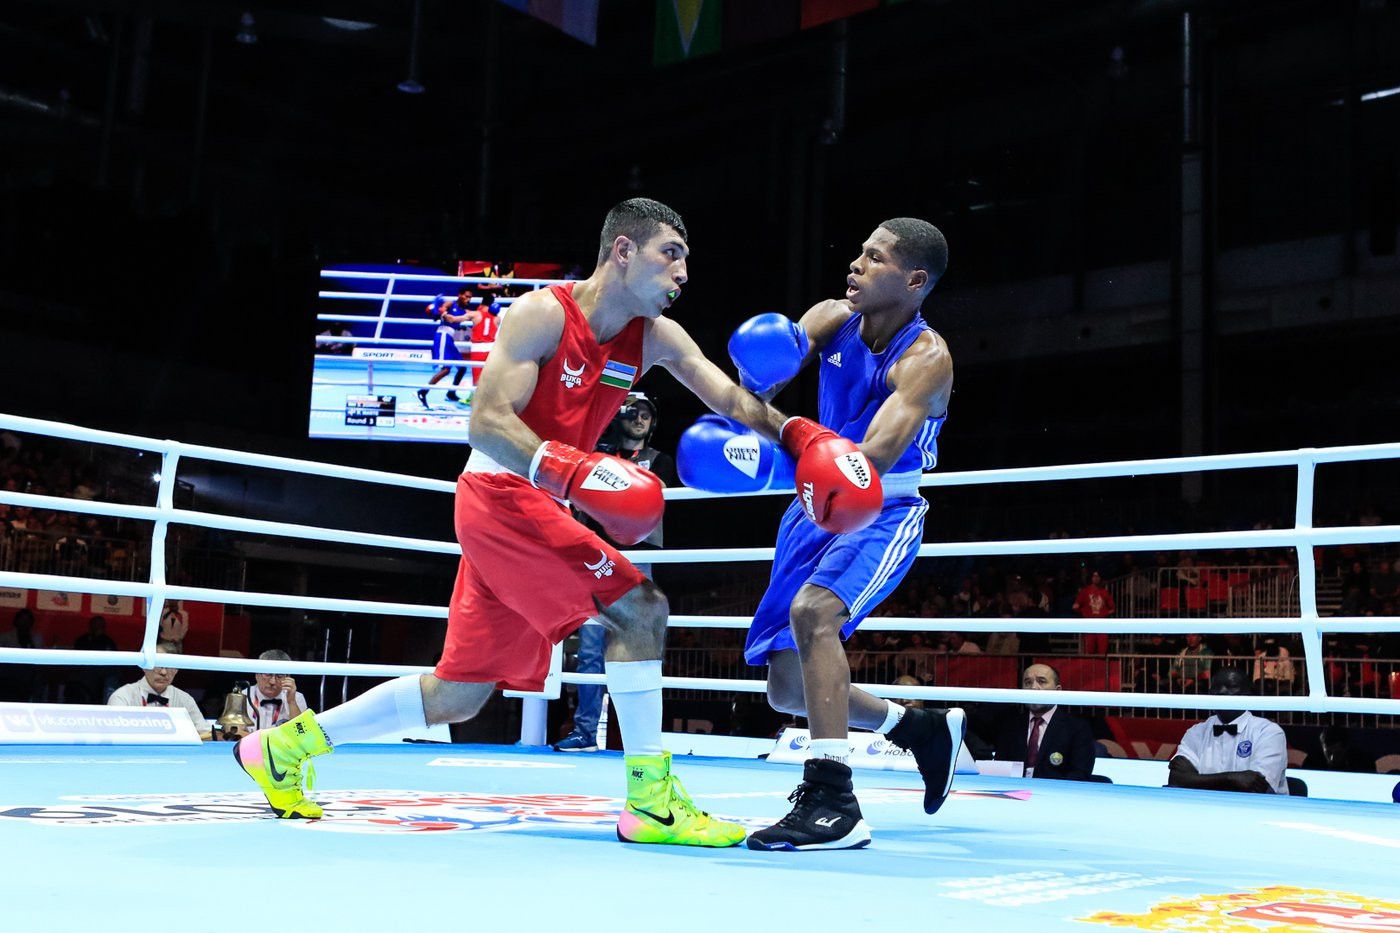 Olympic champion Shakhobidin Zoirov of Uzbekistan then knocked Rodrigo Marte of Dominican Republic out of the competition, securing a unanimous victory to do so ©Yekaterinburg 2019